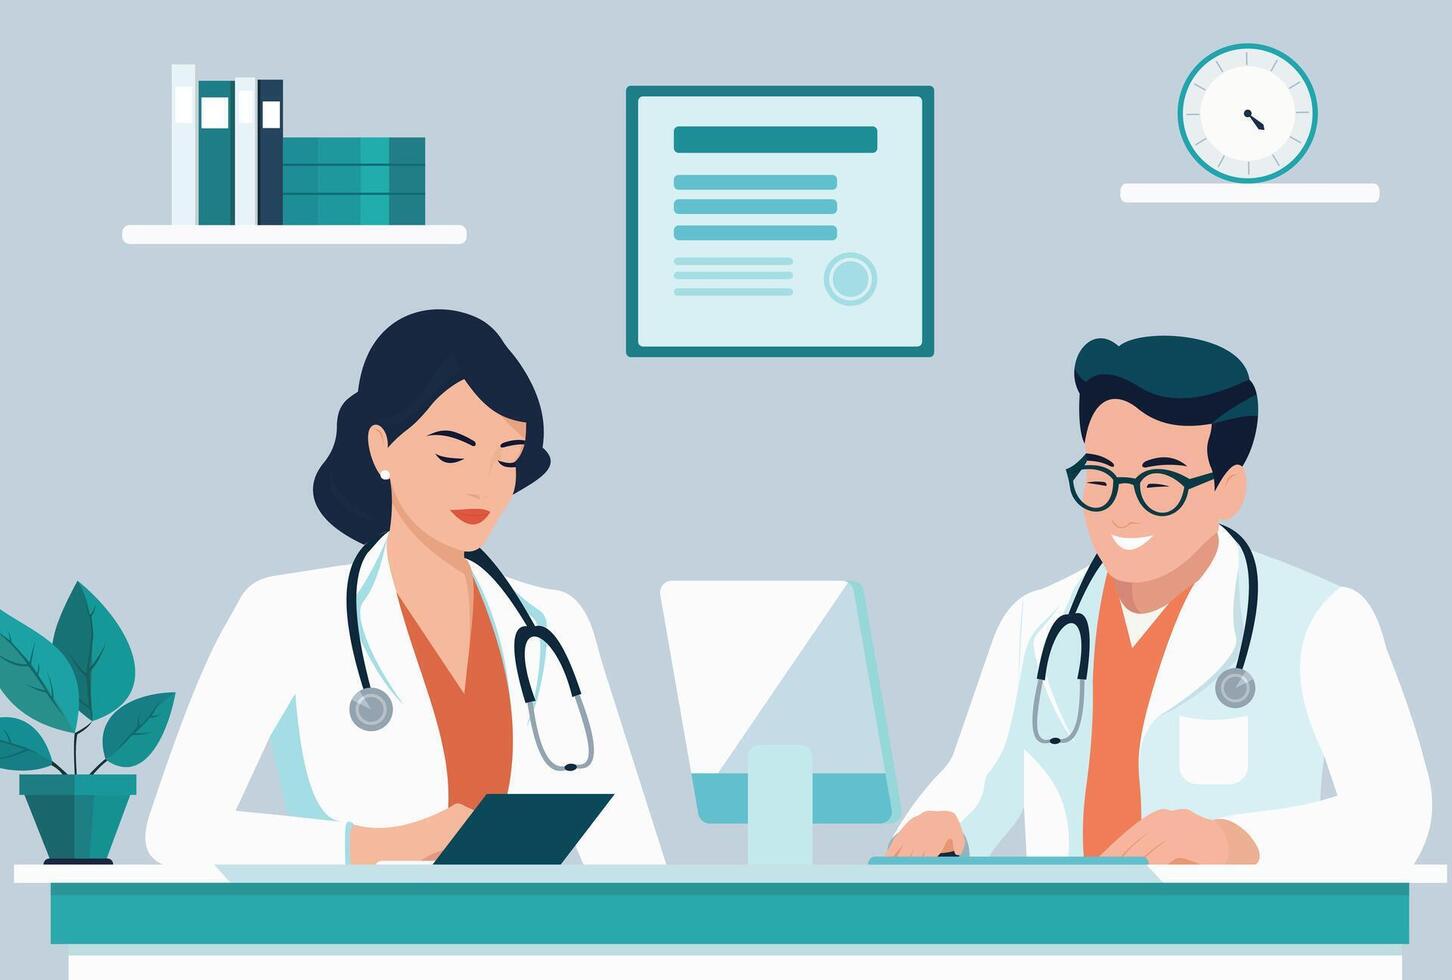 Female doctor and male doctor in the hospital. Medicine concept illustration vector